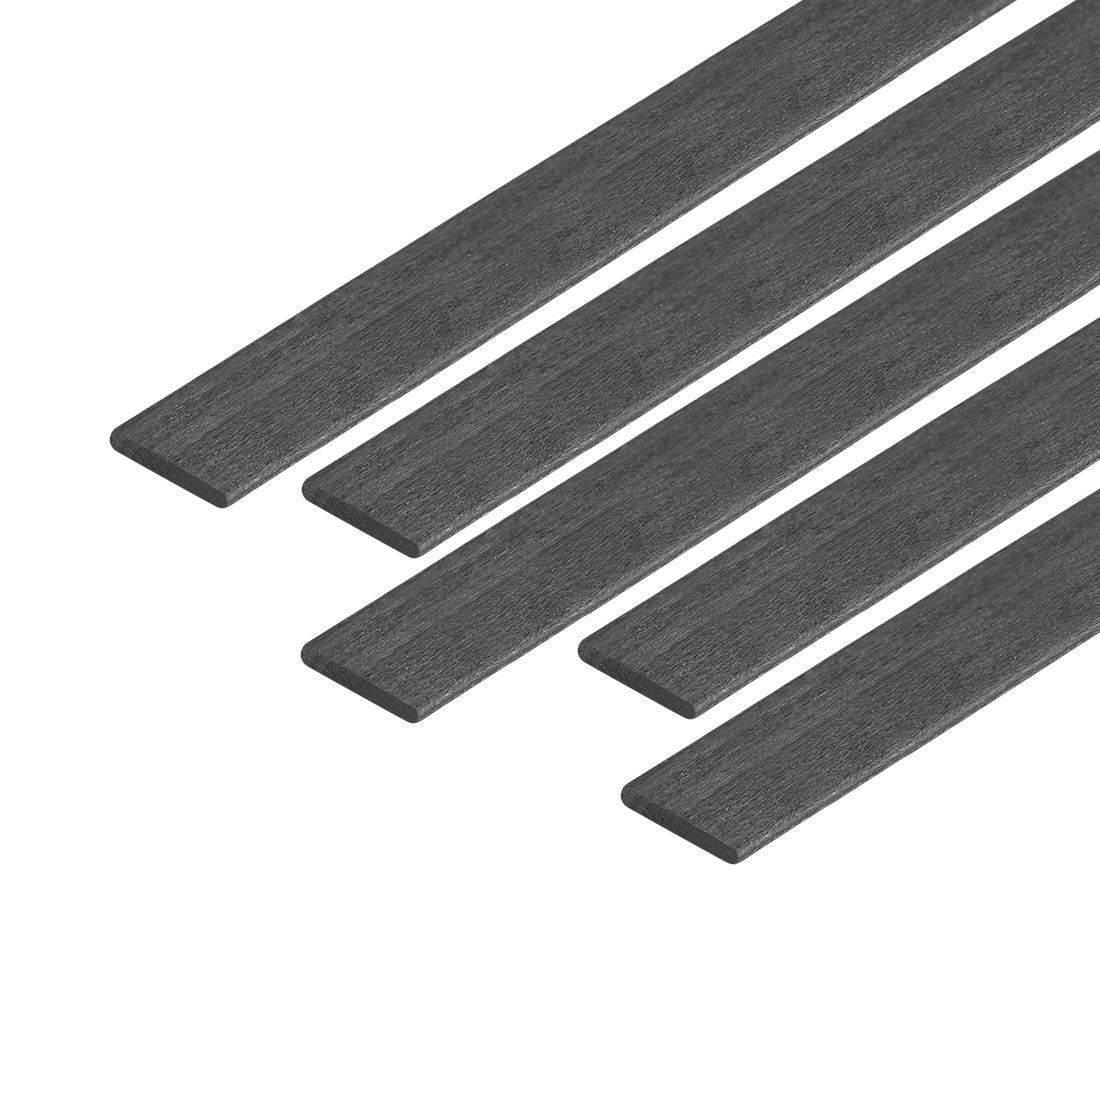 uxcell Uxcell Carbon Fiber Strip Bars 1x5mm 600mm Length Pultruded Carbon Fiber Strips for Kites, RC Airplane 5 Pcs